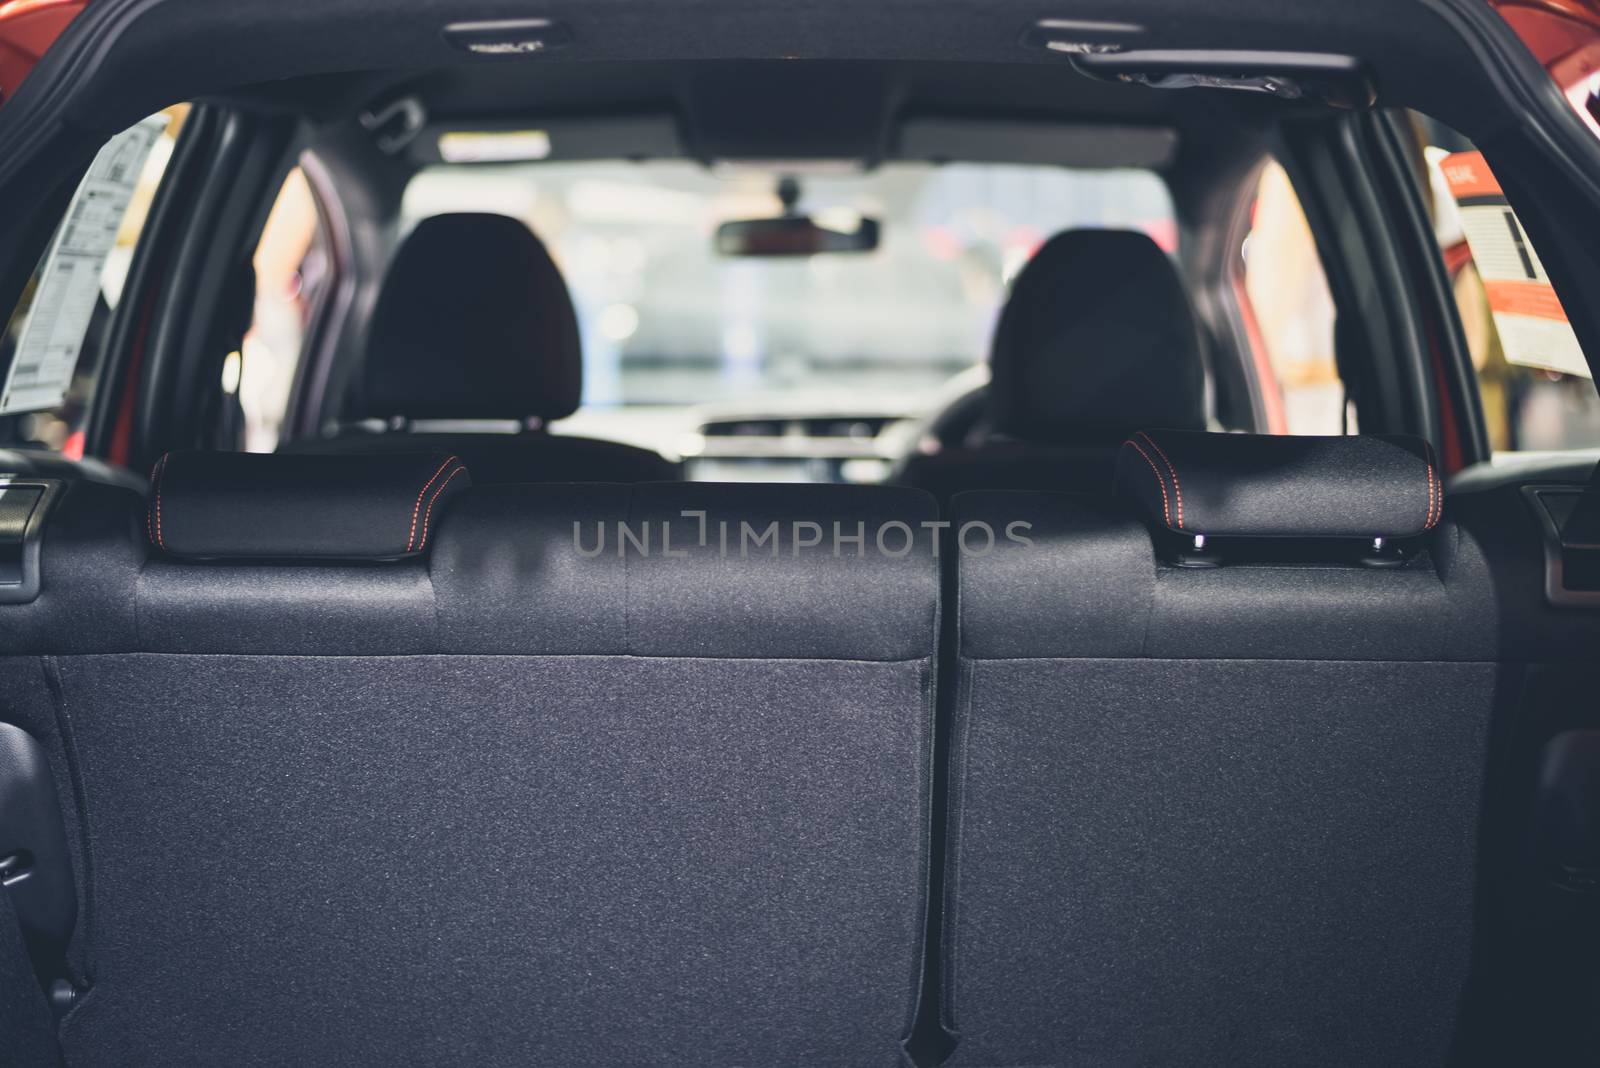 Interior Of The Car for backgroud